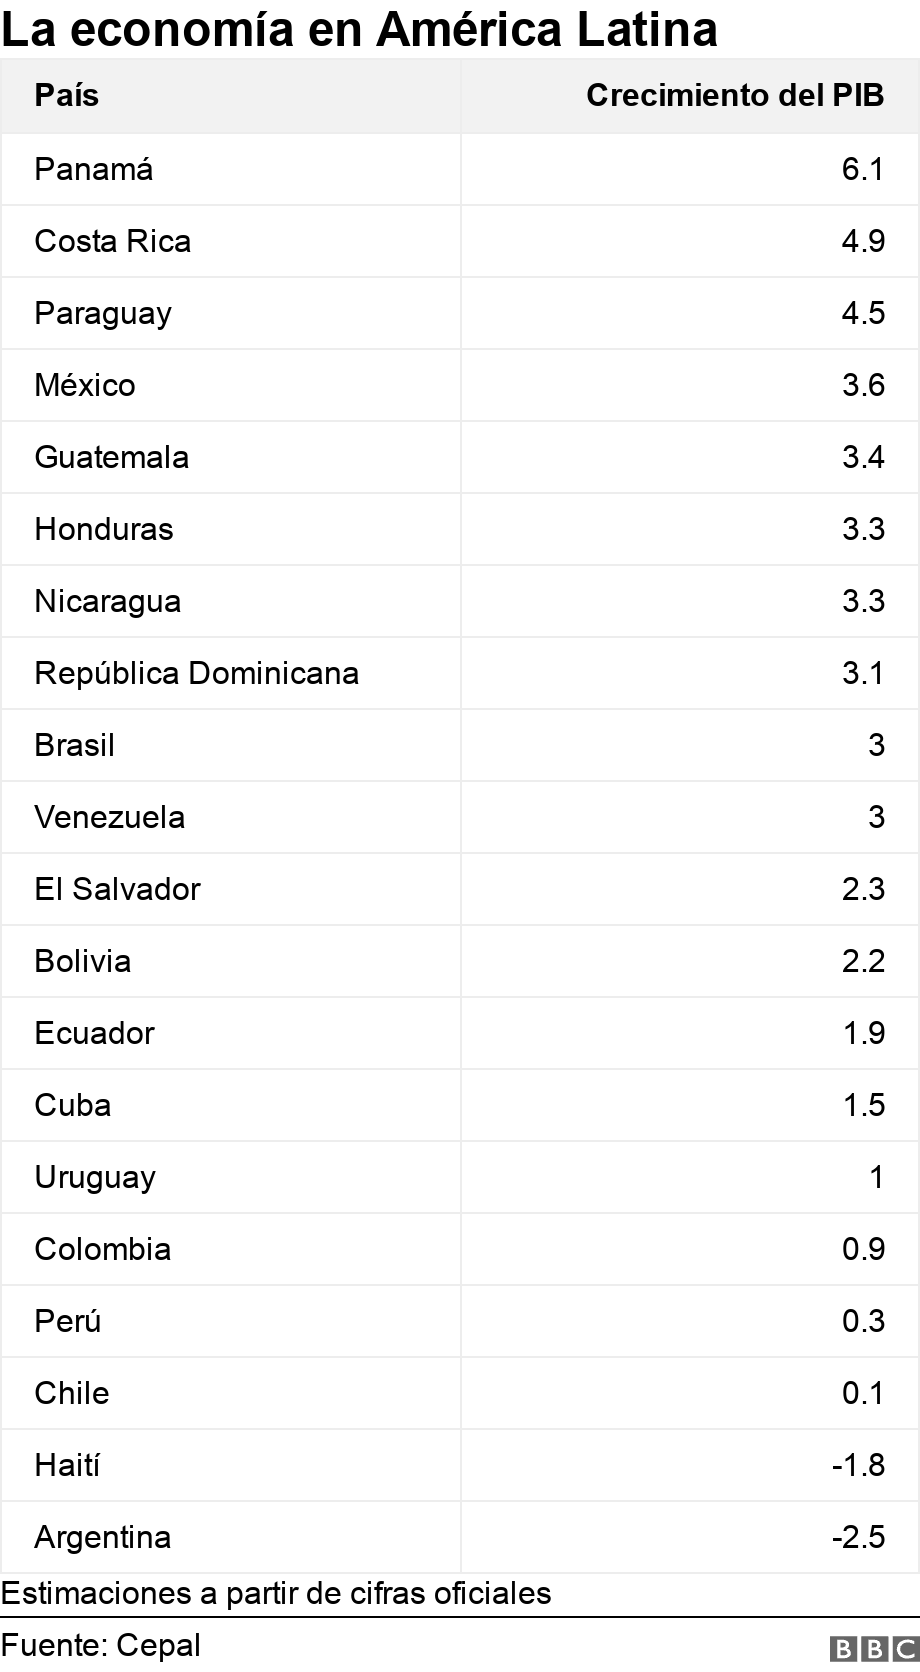 The economy in Latin America.  .  Estimates based on official figures.